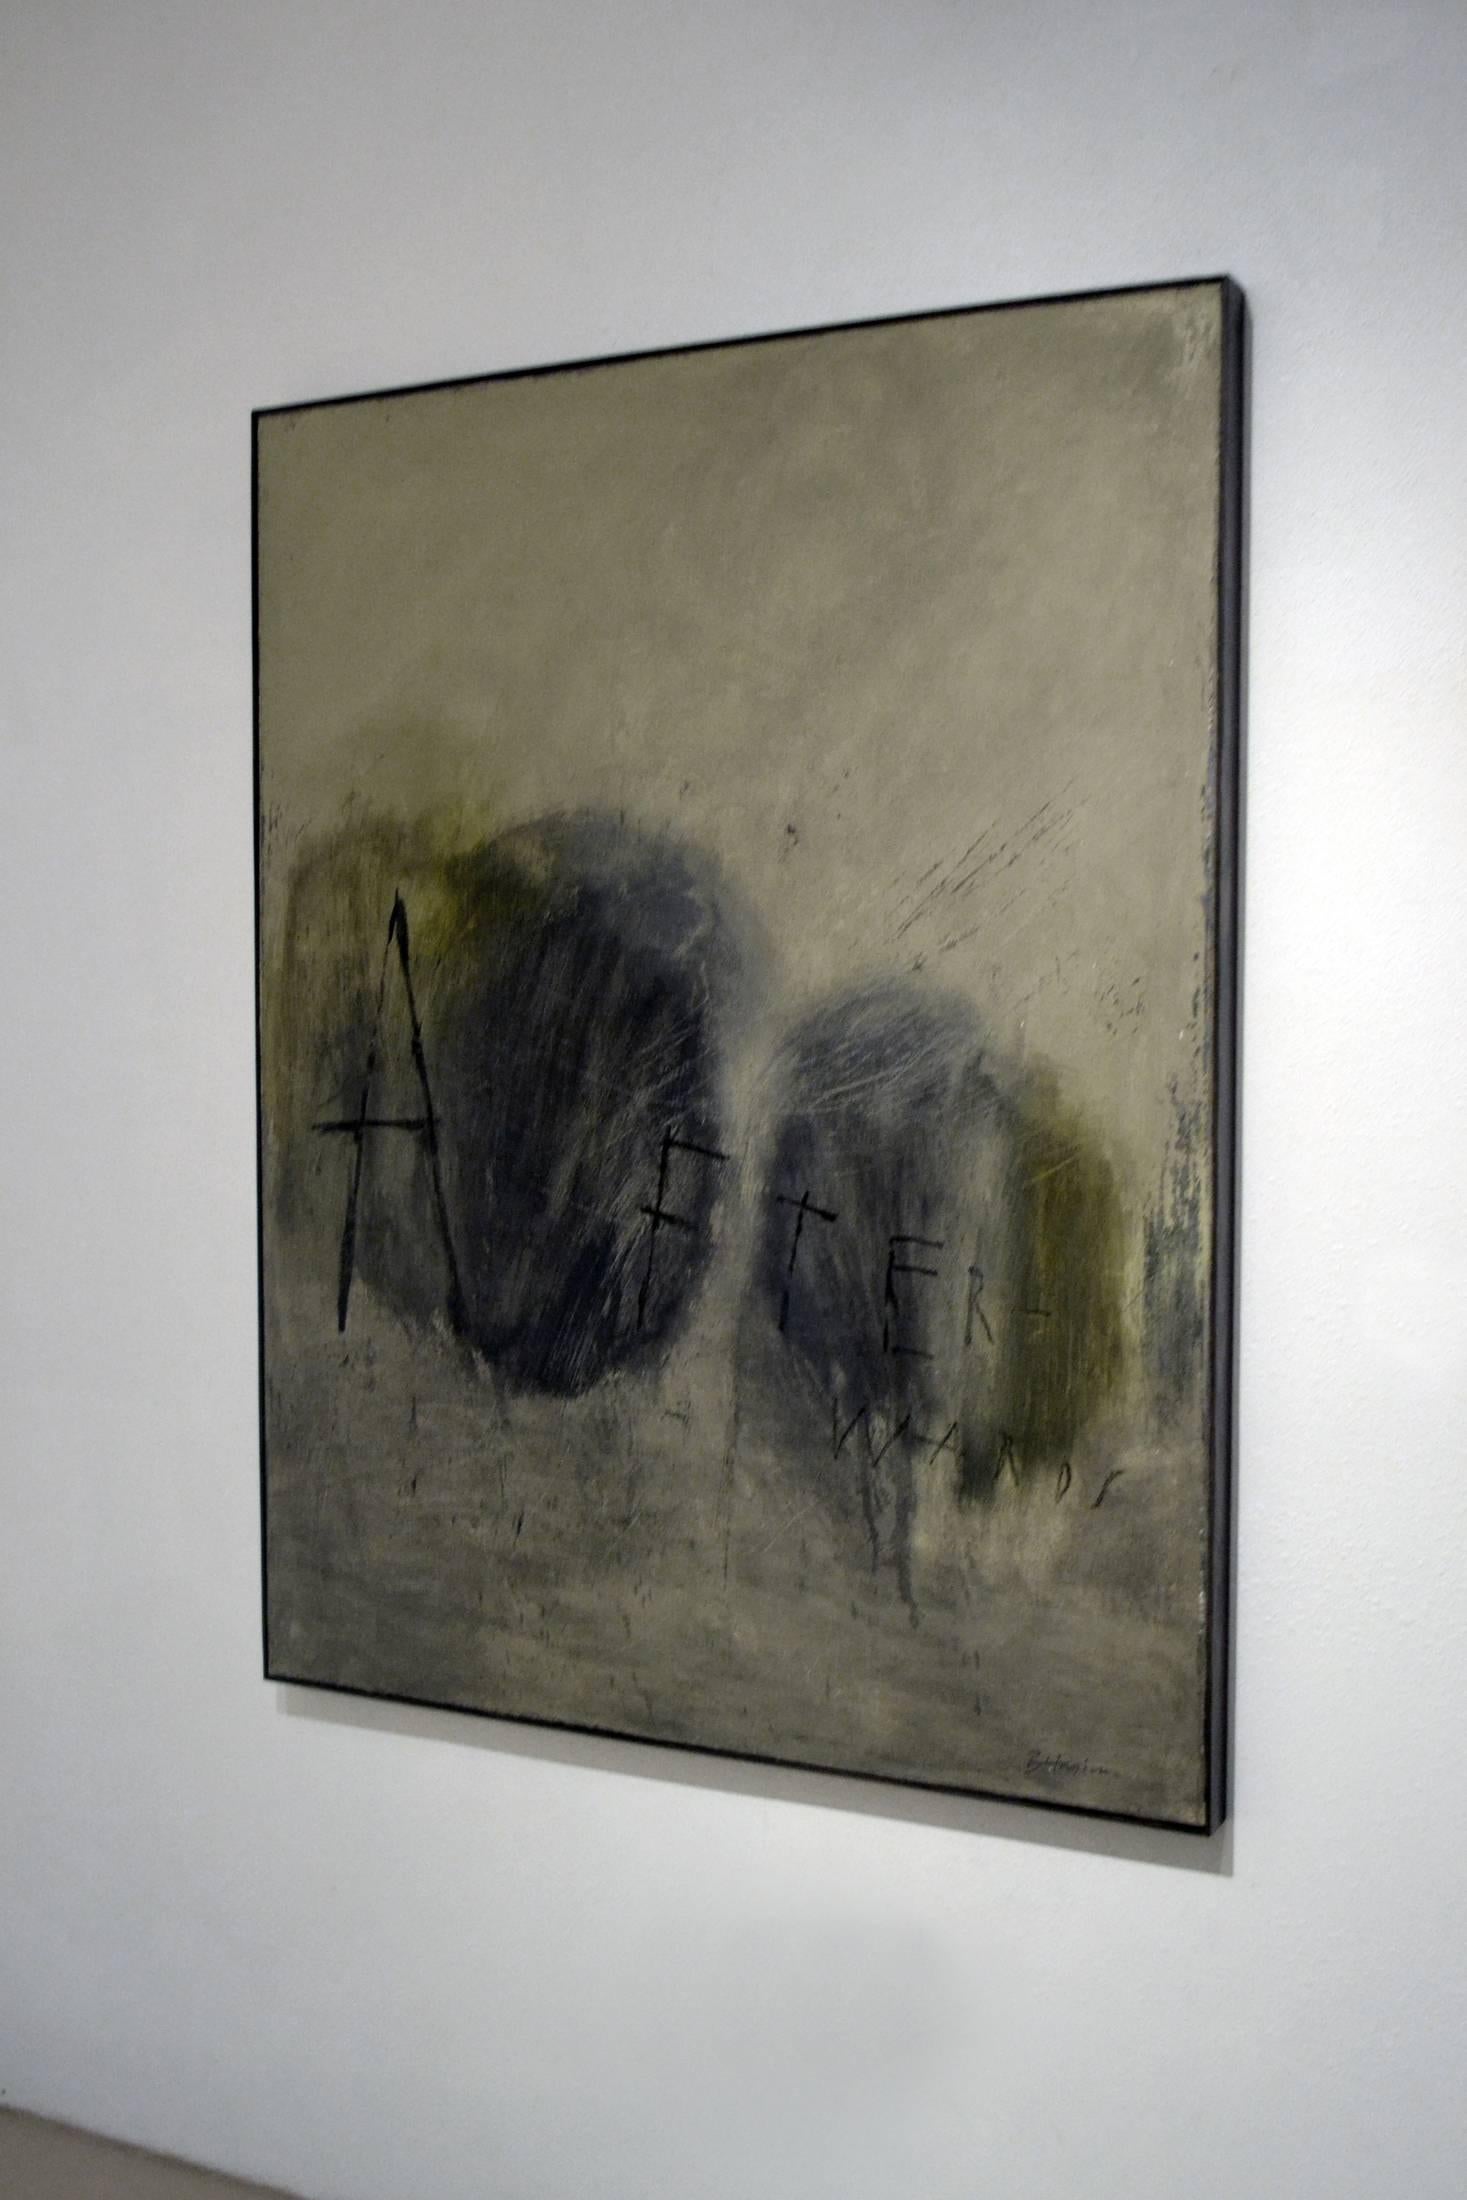 Brian Hagiwara without a doubt is well known and acclaimed for his brilliant still life photography, having photographed everything from Subway Sandwiches to Bobby Brown Cosmetics and more. This impressive abstract oil and mixed media on canvas is